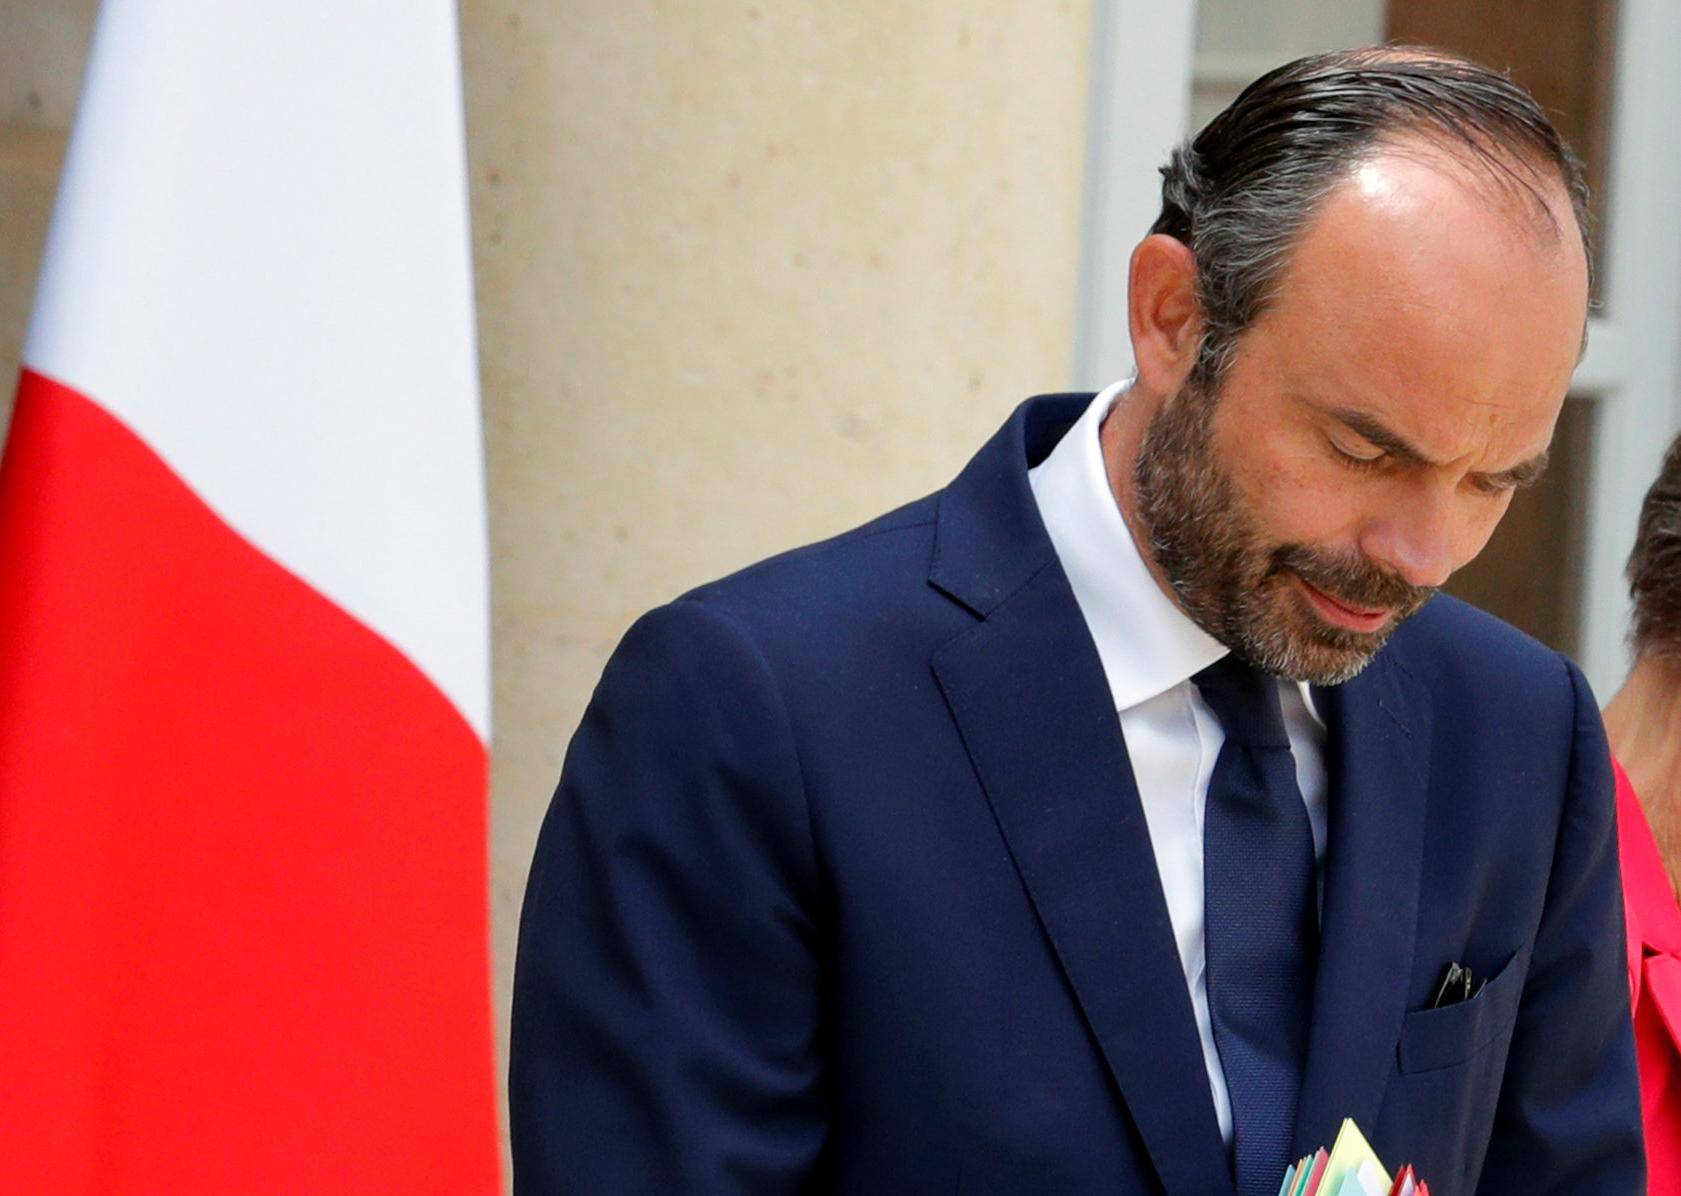 French Prime Minister Edouard Philippe leaves at the end of the weekly cabinet meeting at the Elysee Palace in Paris